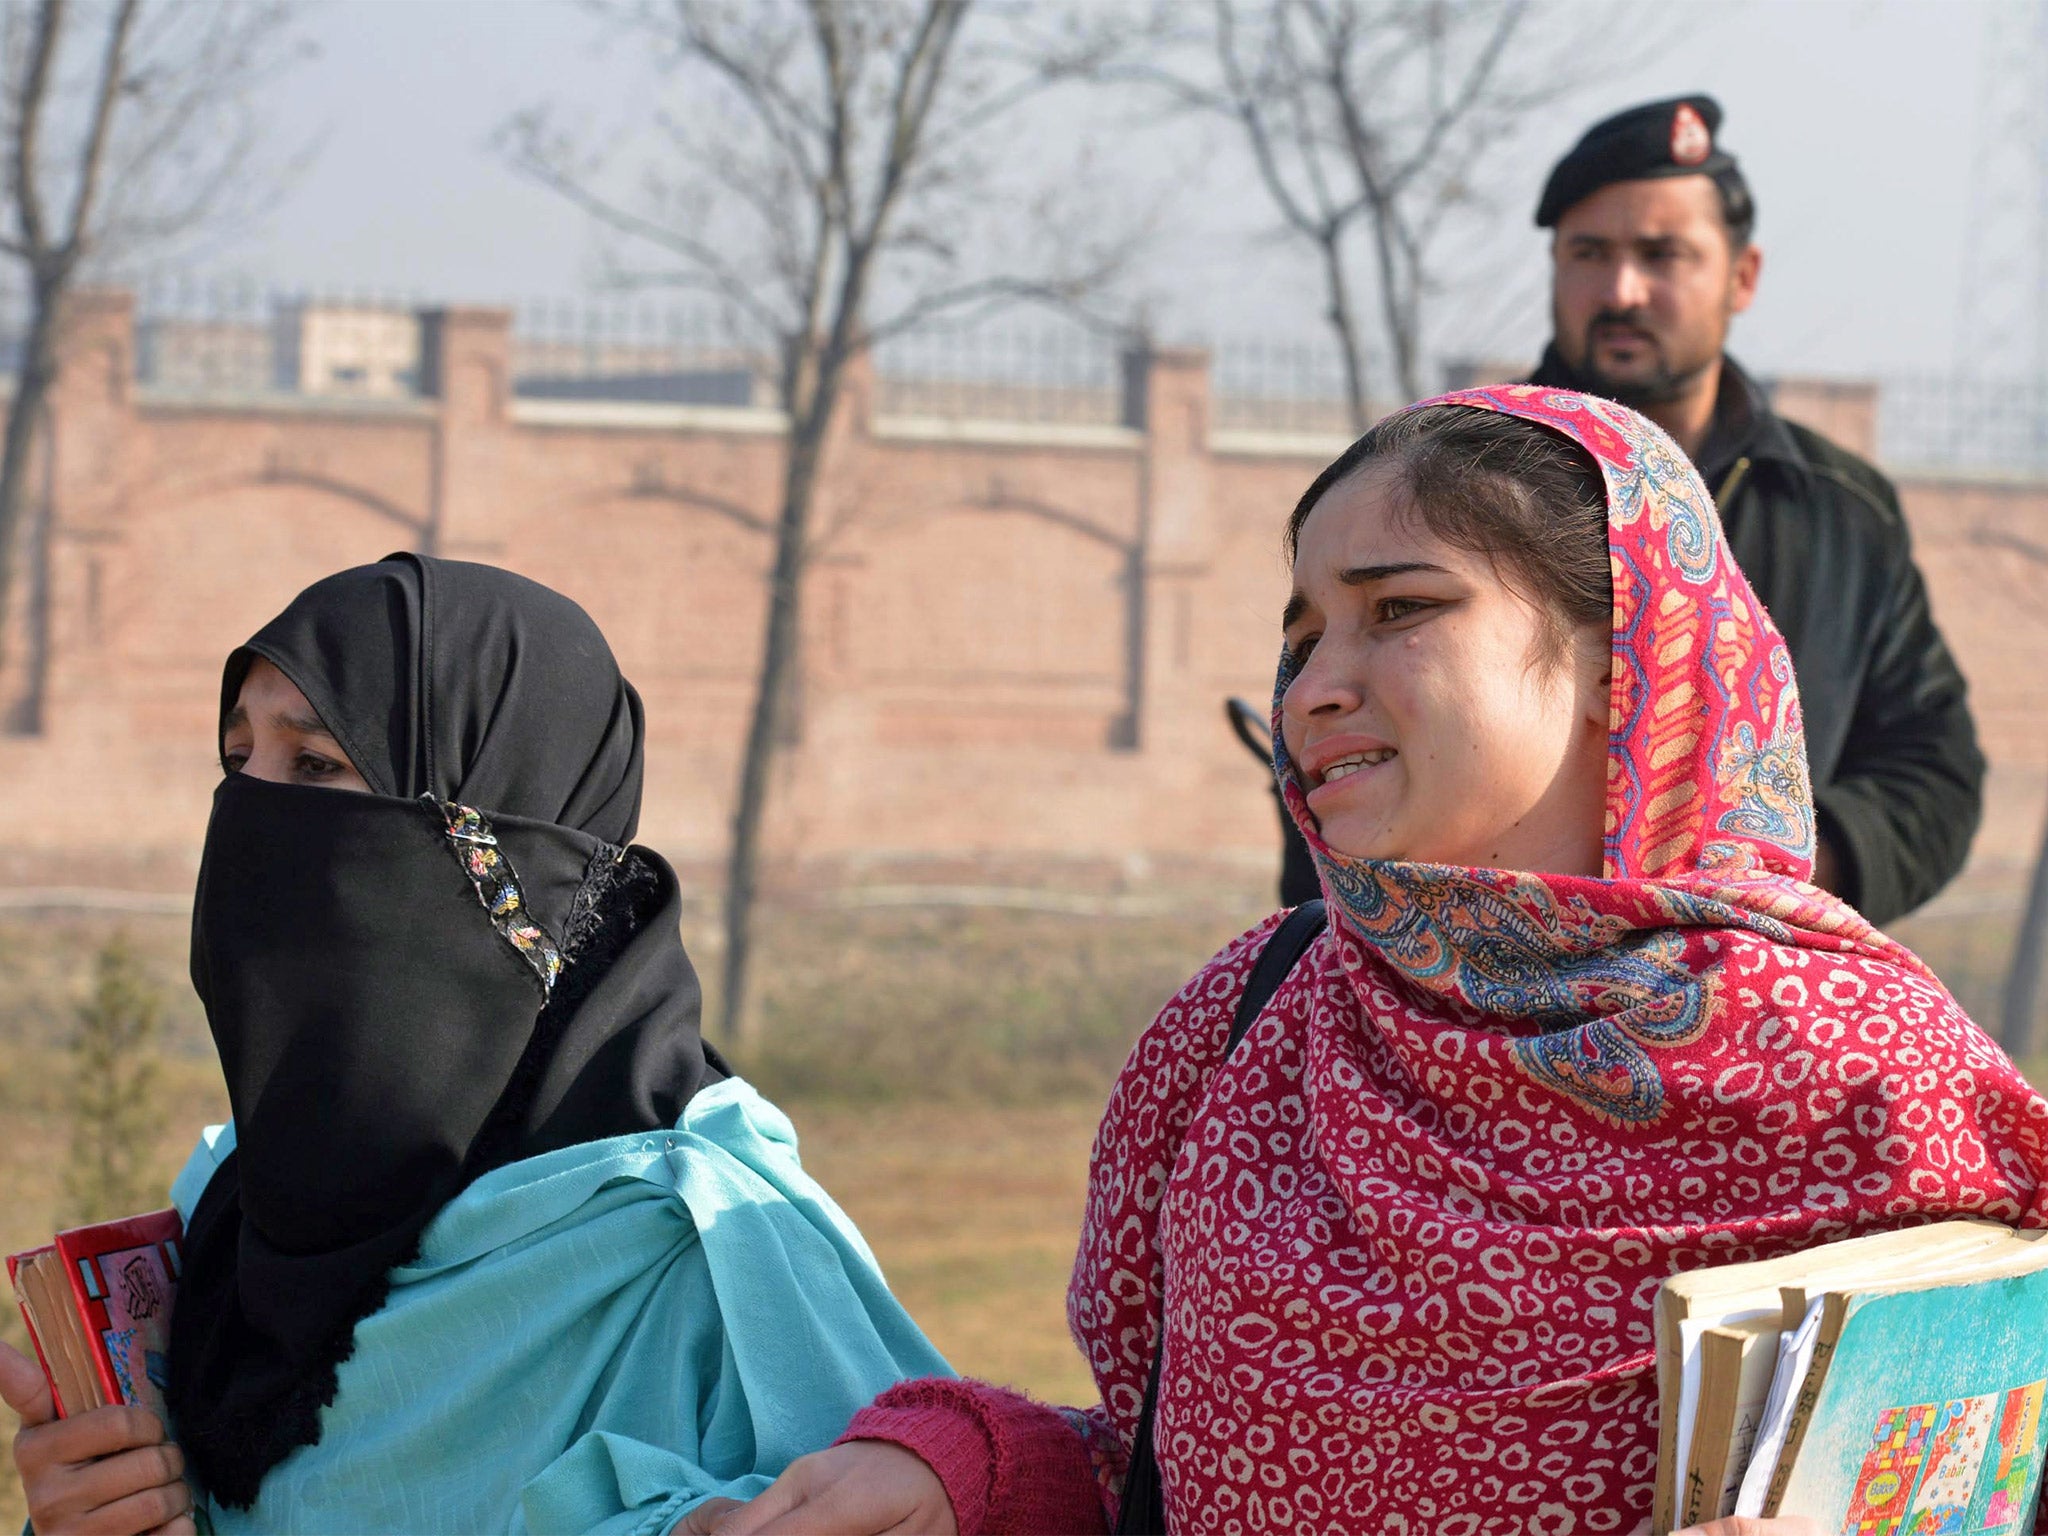 Student of Bacha Khan university react after the attack